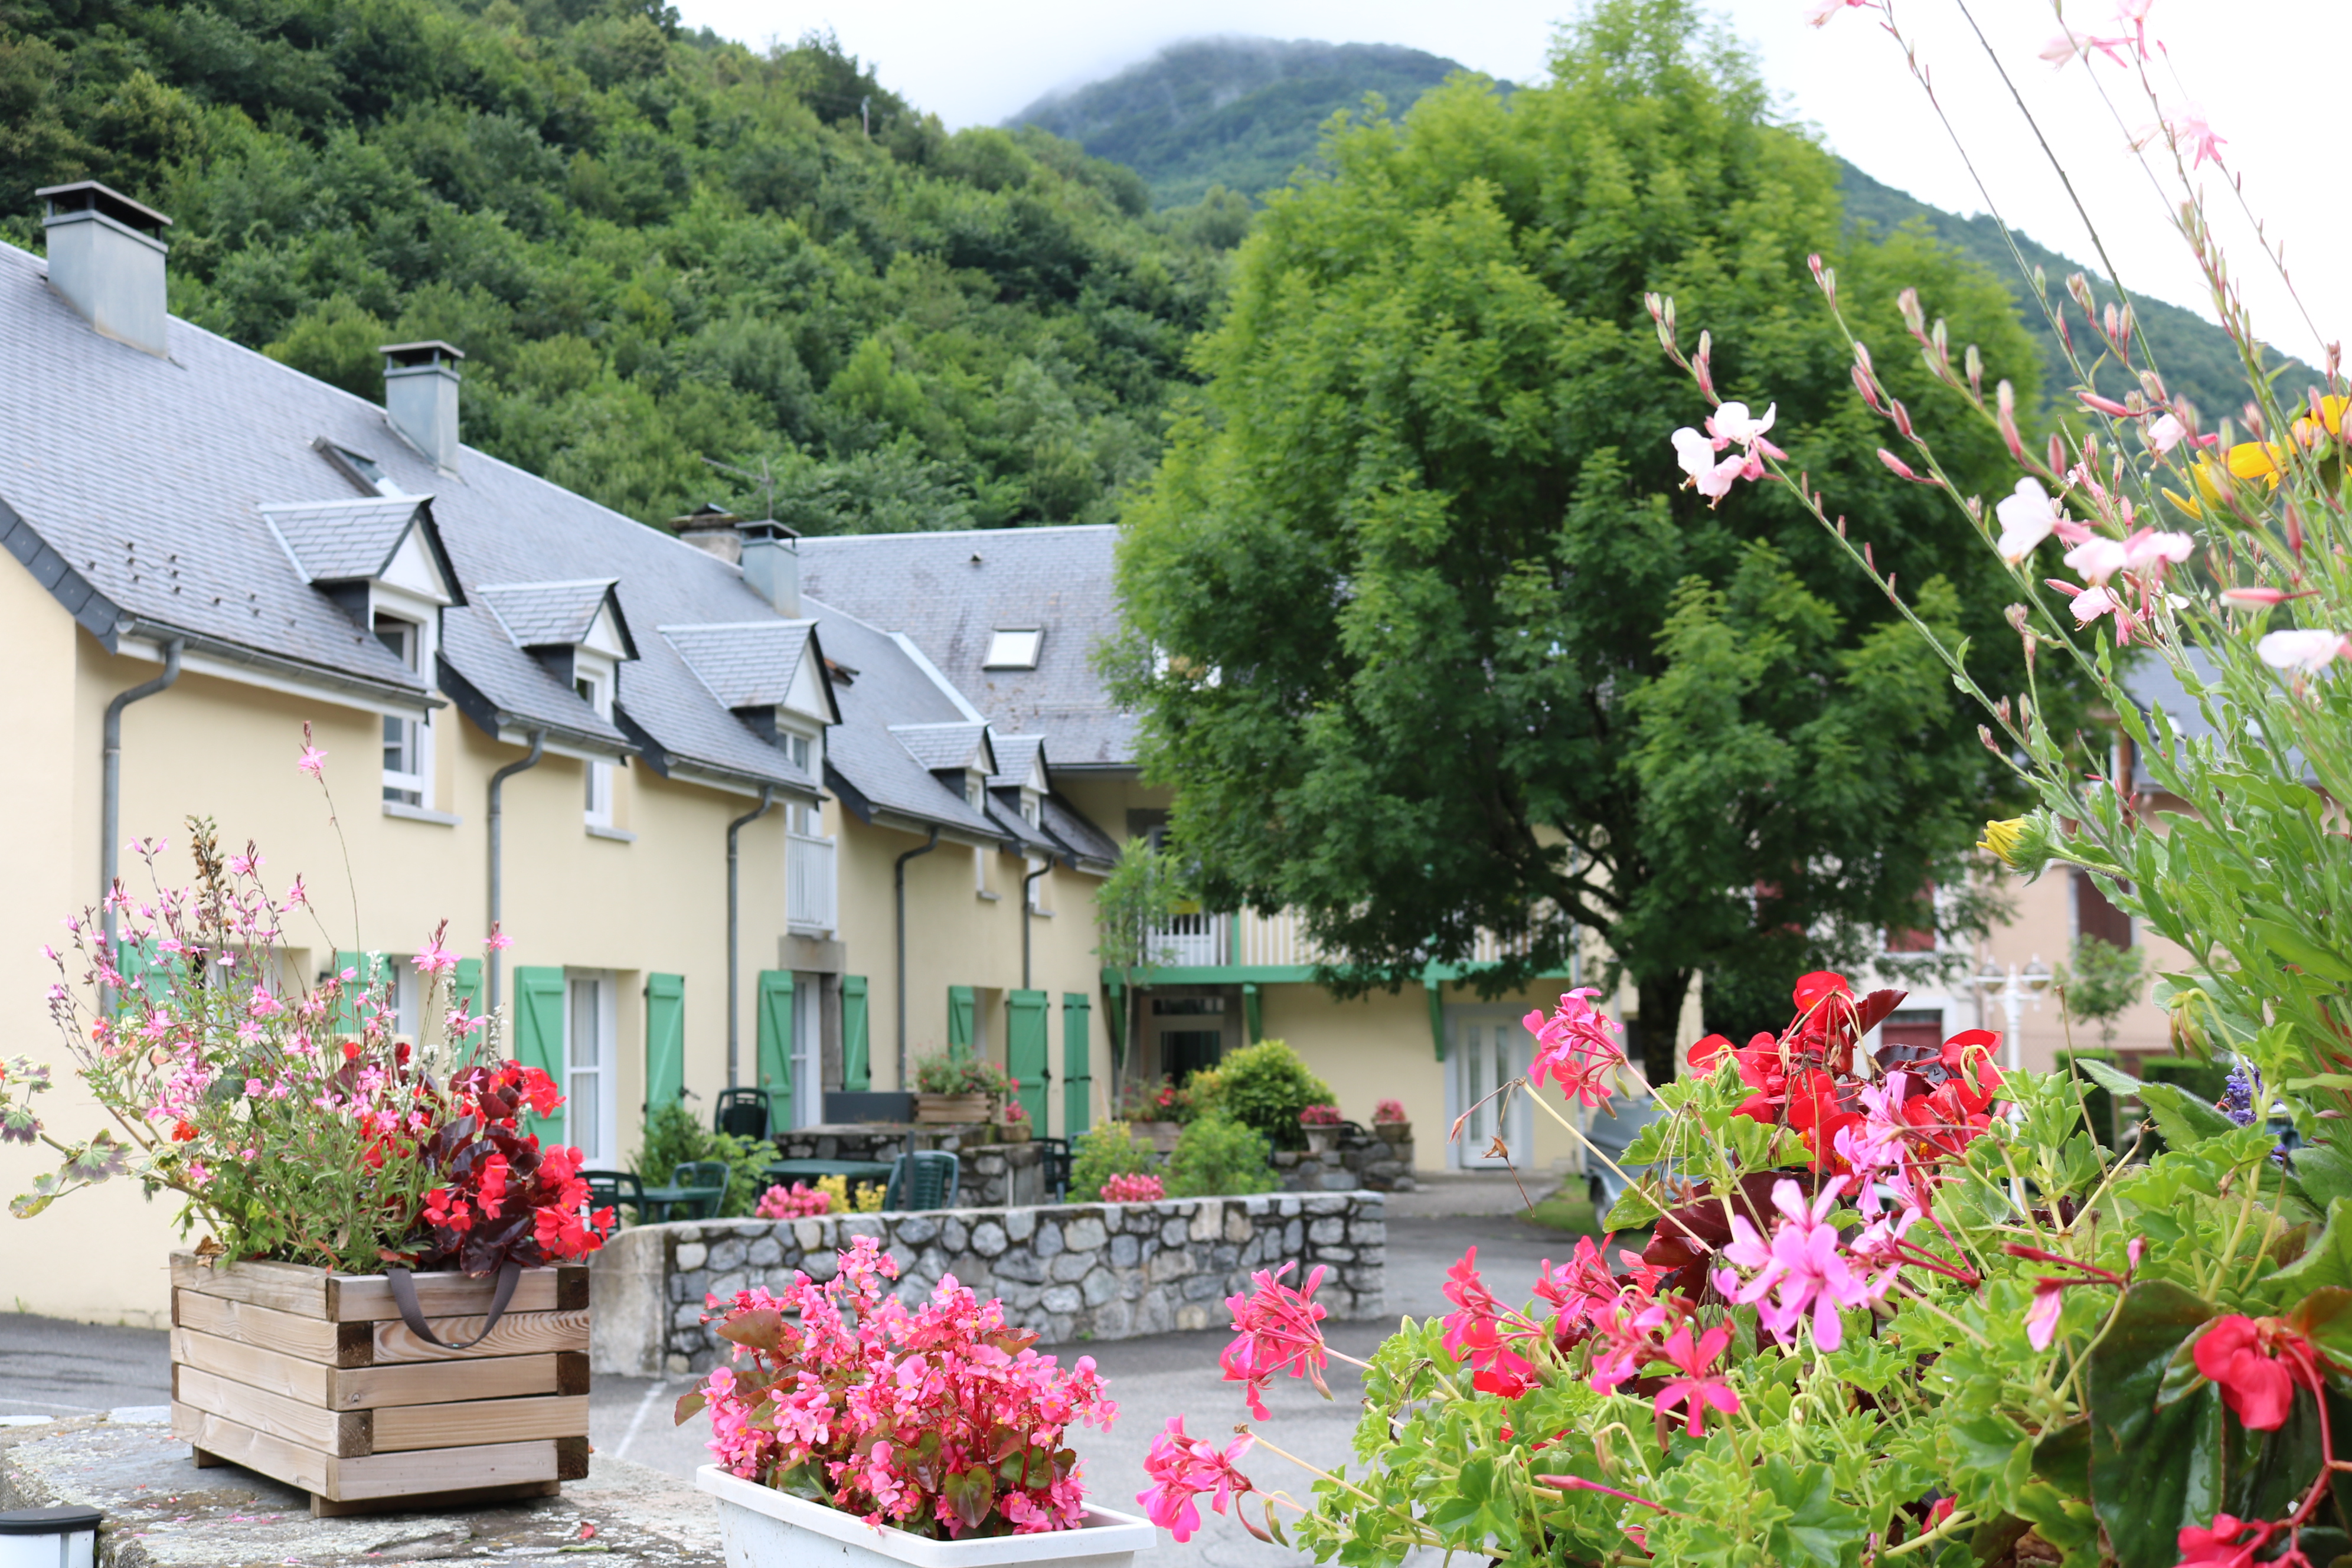 RESIDENCE L'OMBREE : Rental residence France Hautes Pyrenees